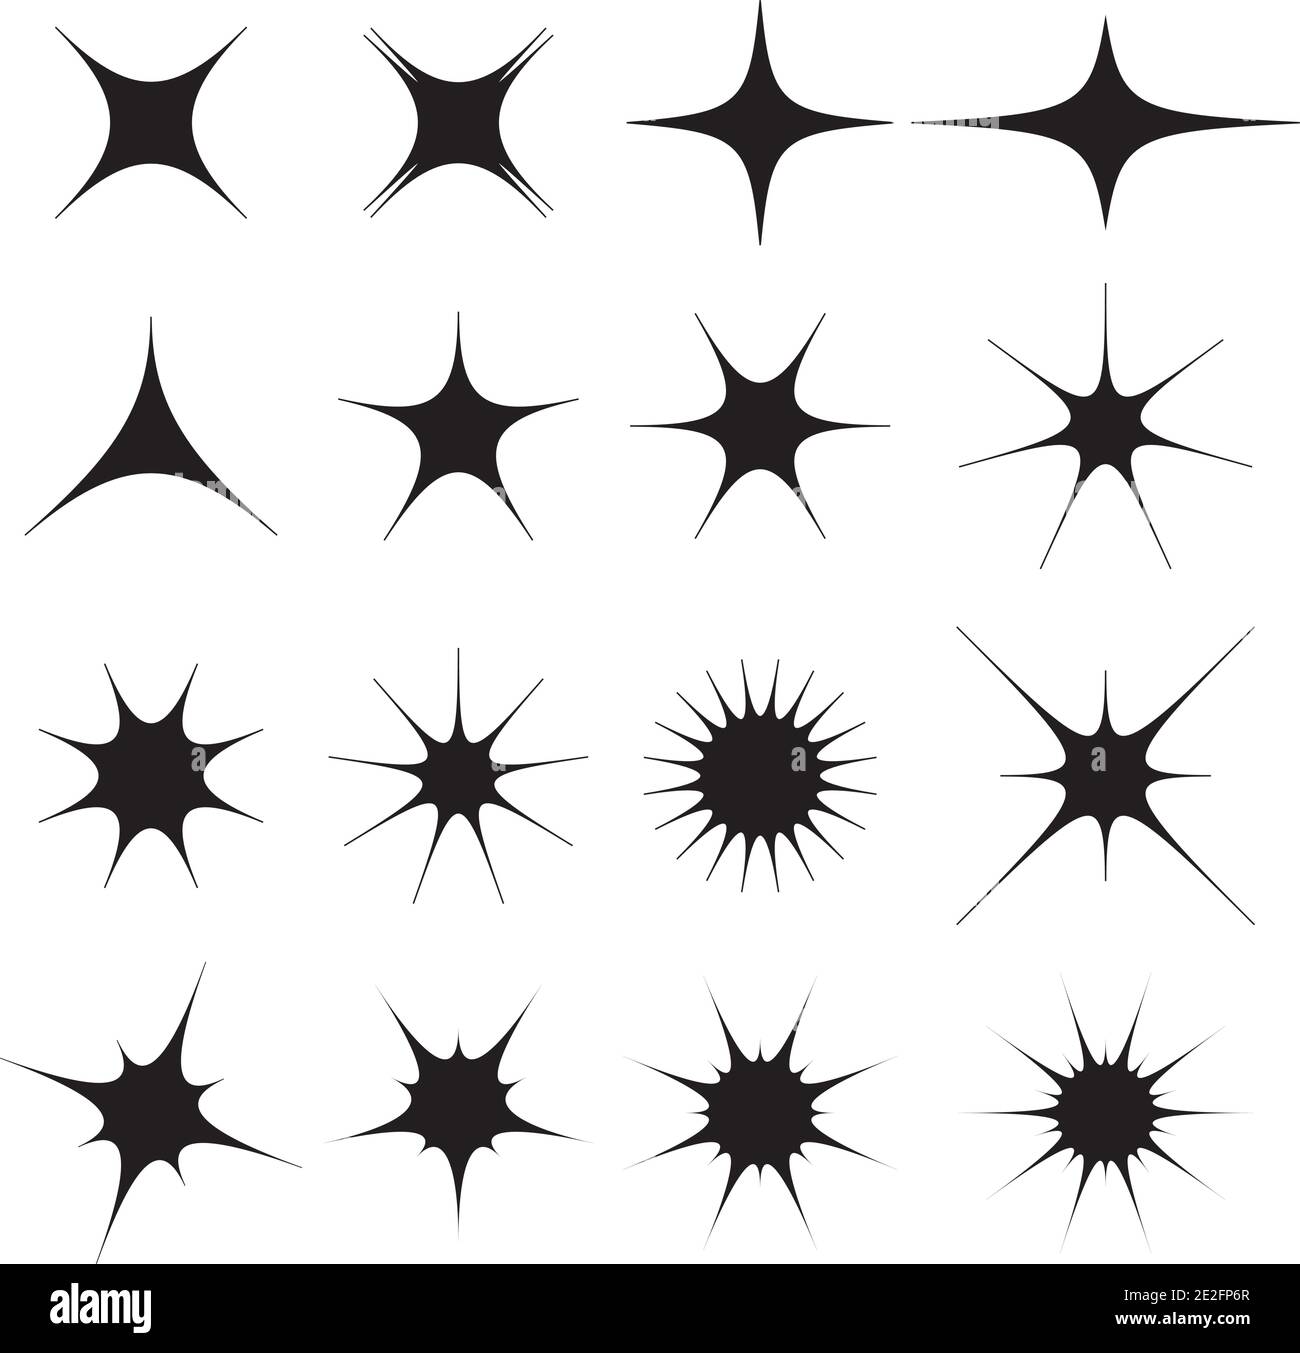 Black sparkles symbols set of stars sparkle icon. Bright firework, decoration twinkle, shiny flash. Glowing light effect stars and bursts collection. Stock Vector